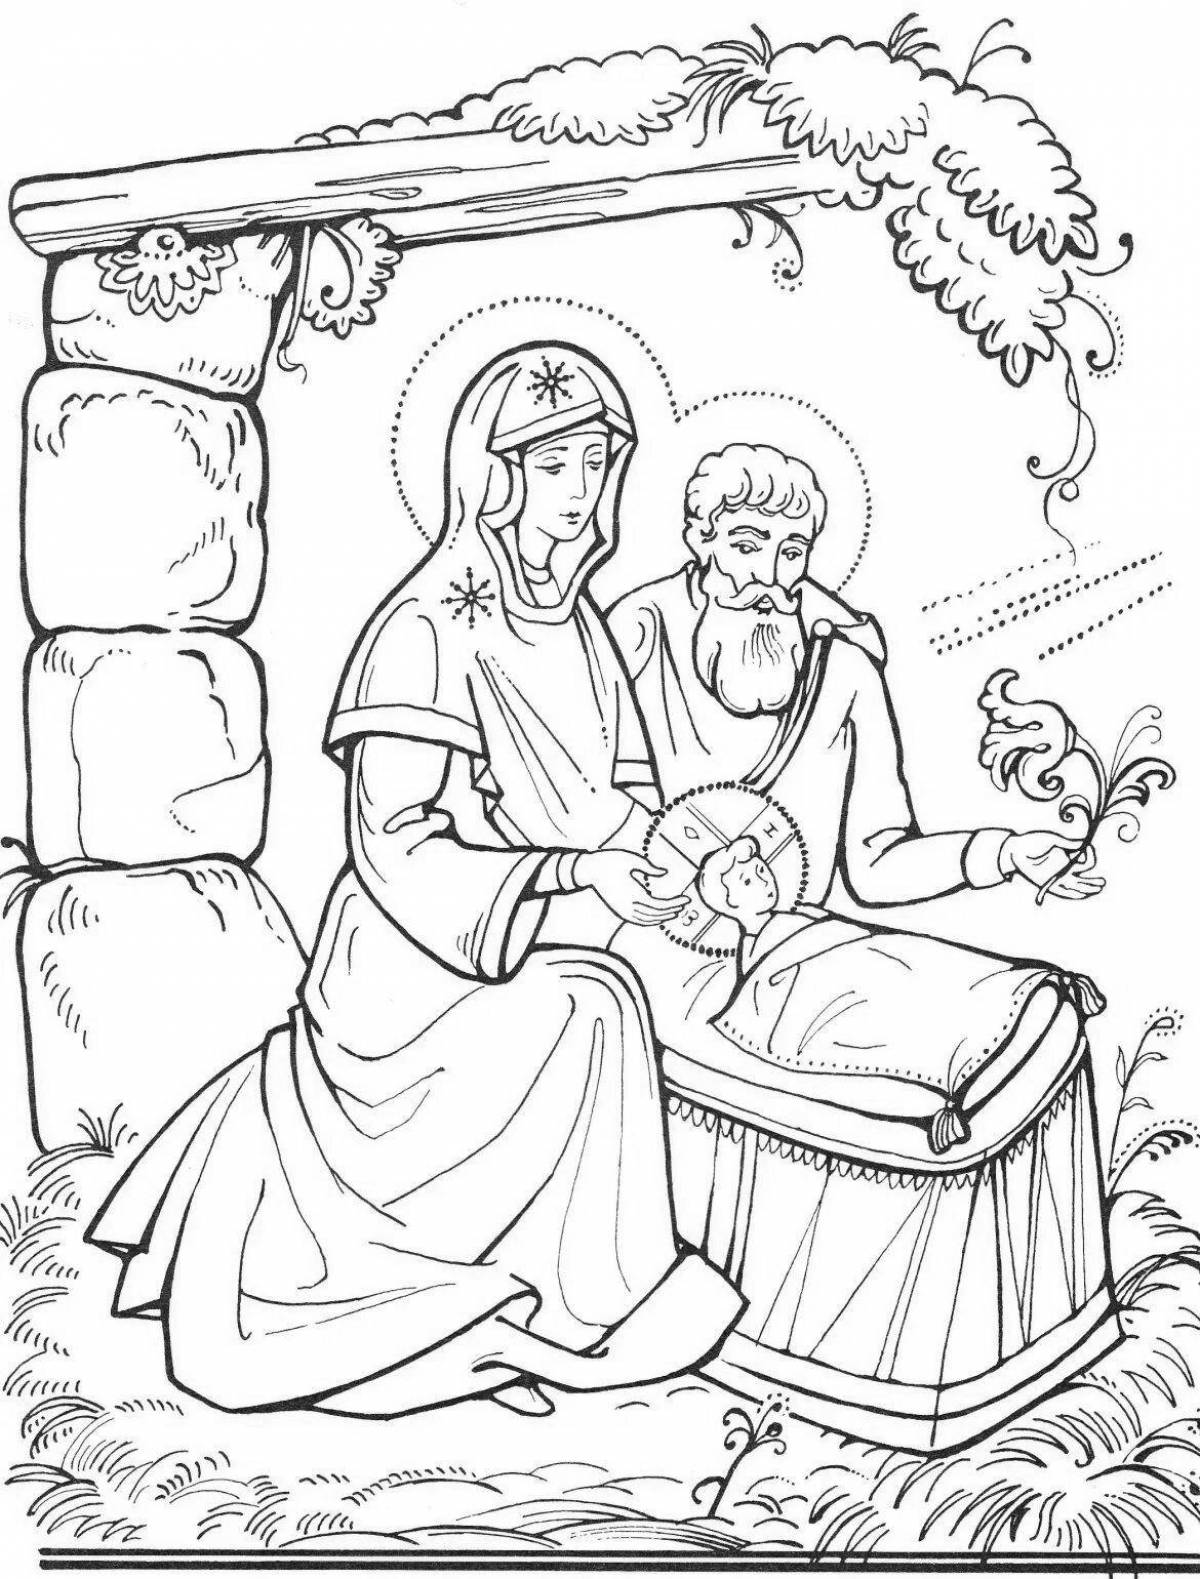 Celestial illustration of the birth of jesus christ coloring book